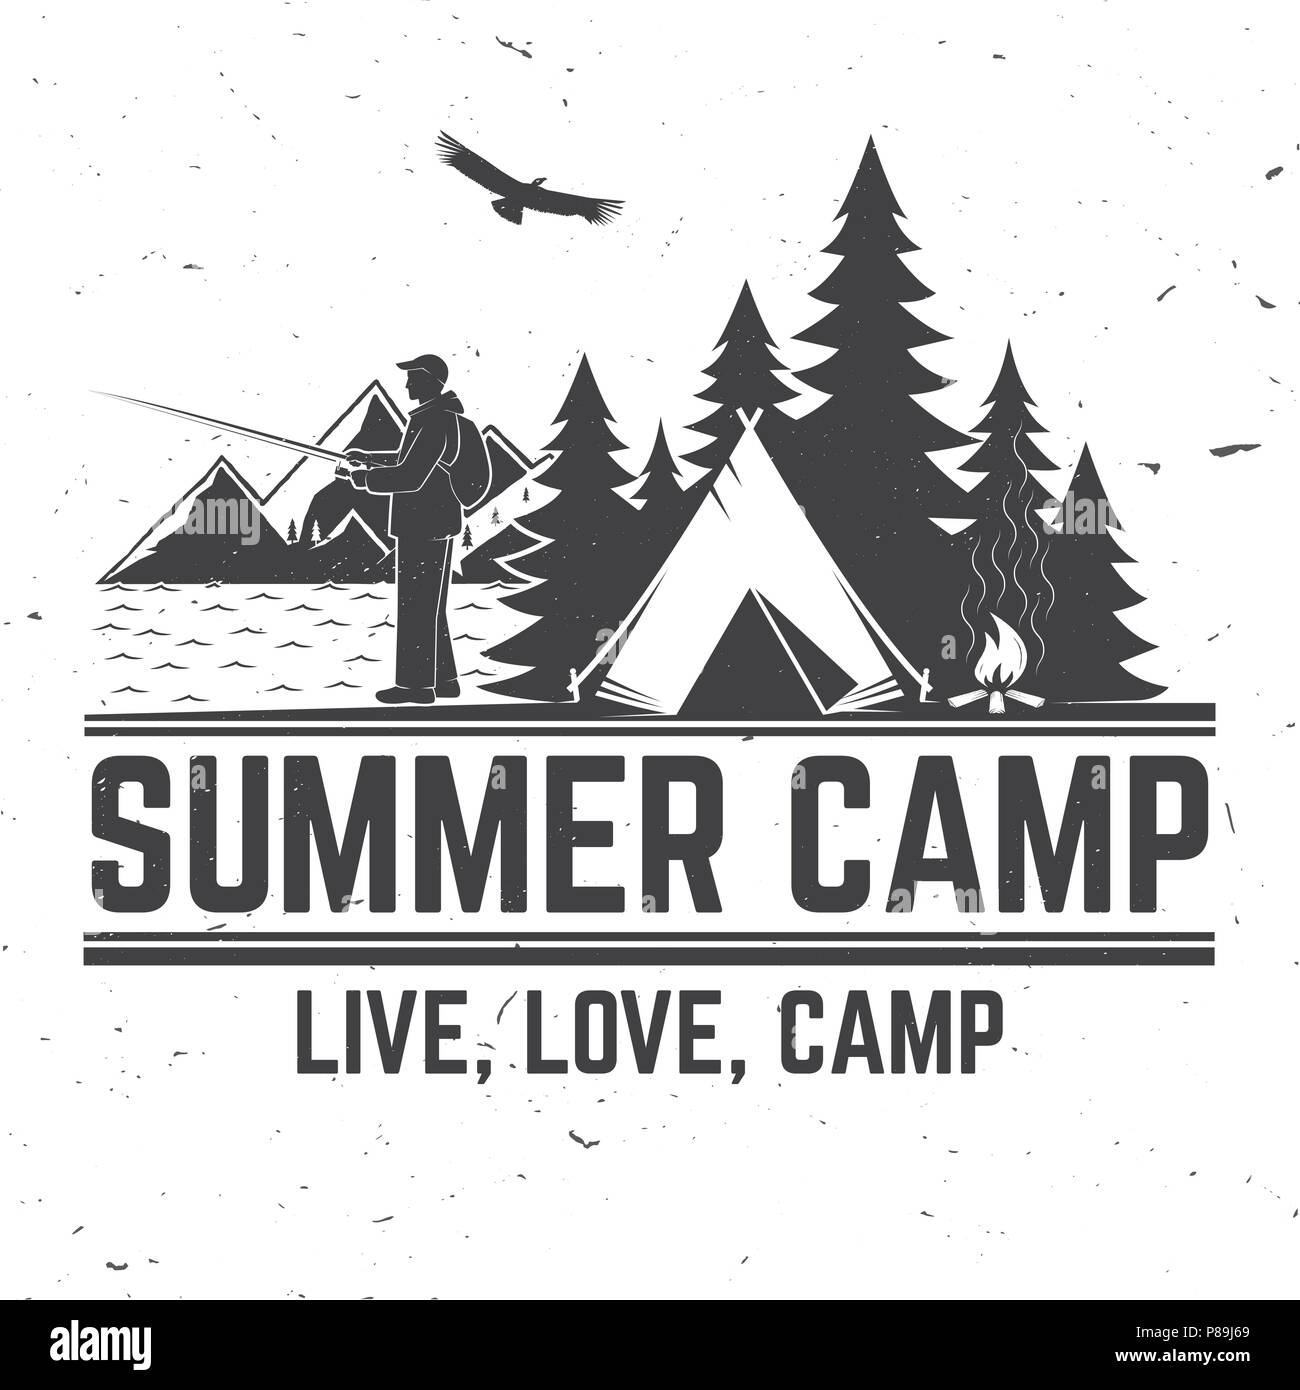 Summer camp. Vector illustration. Concept for shirt or logo, print, stamp or tee. Vintage typography design fisherman, camping tent, campfire and forest silhouette. s Stock Vector